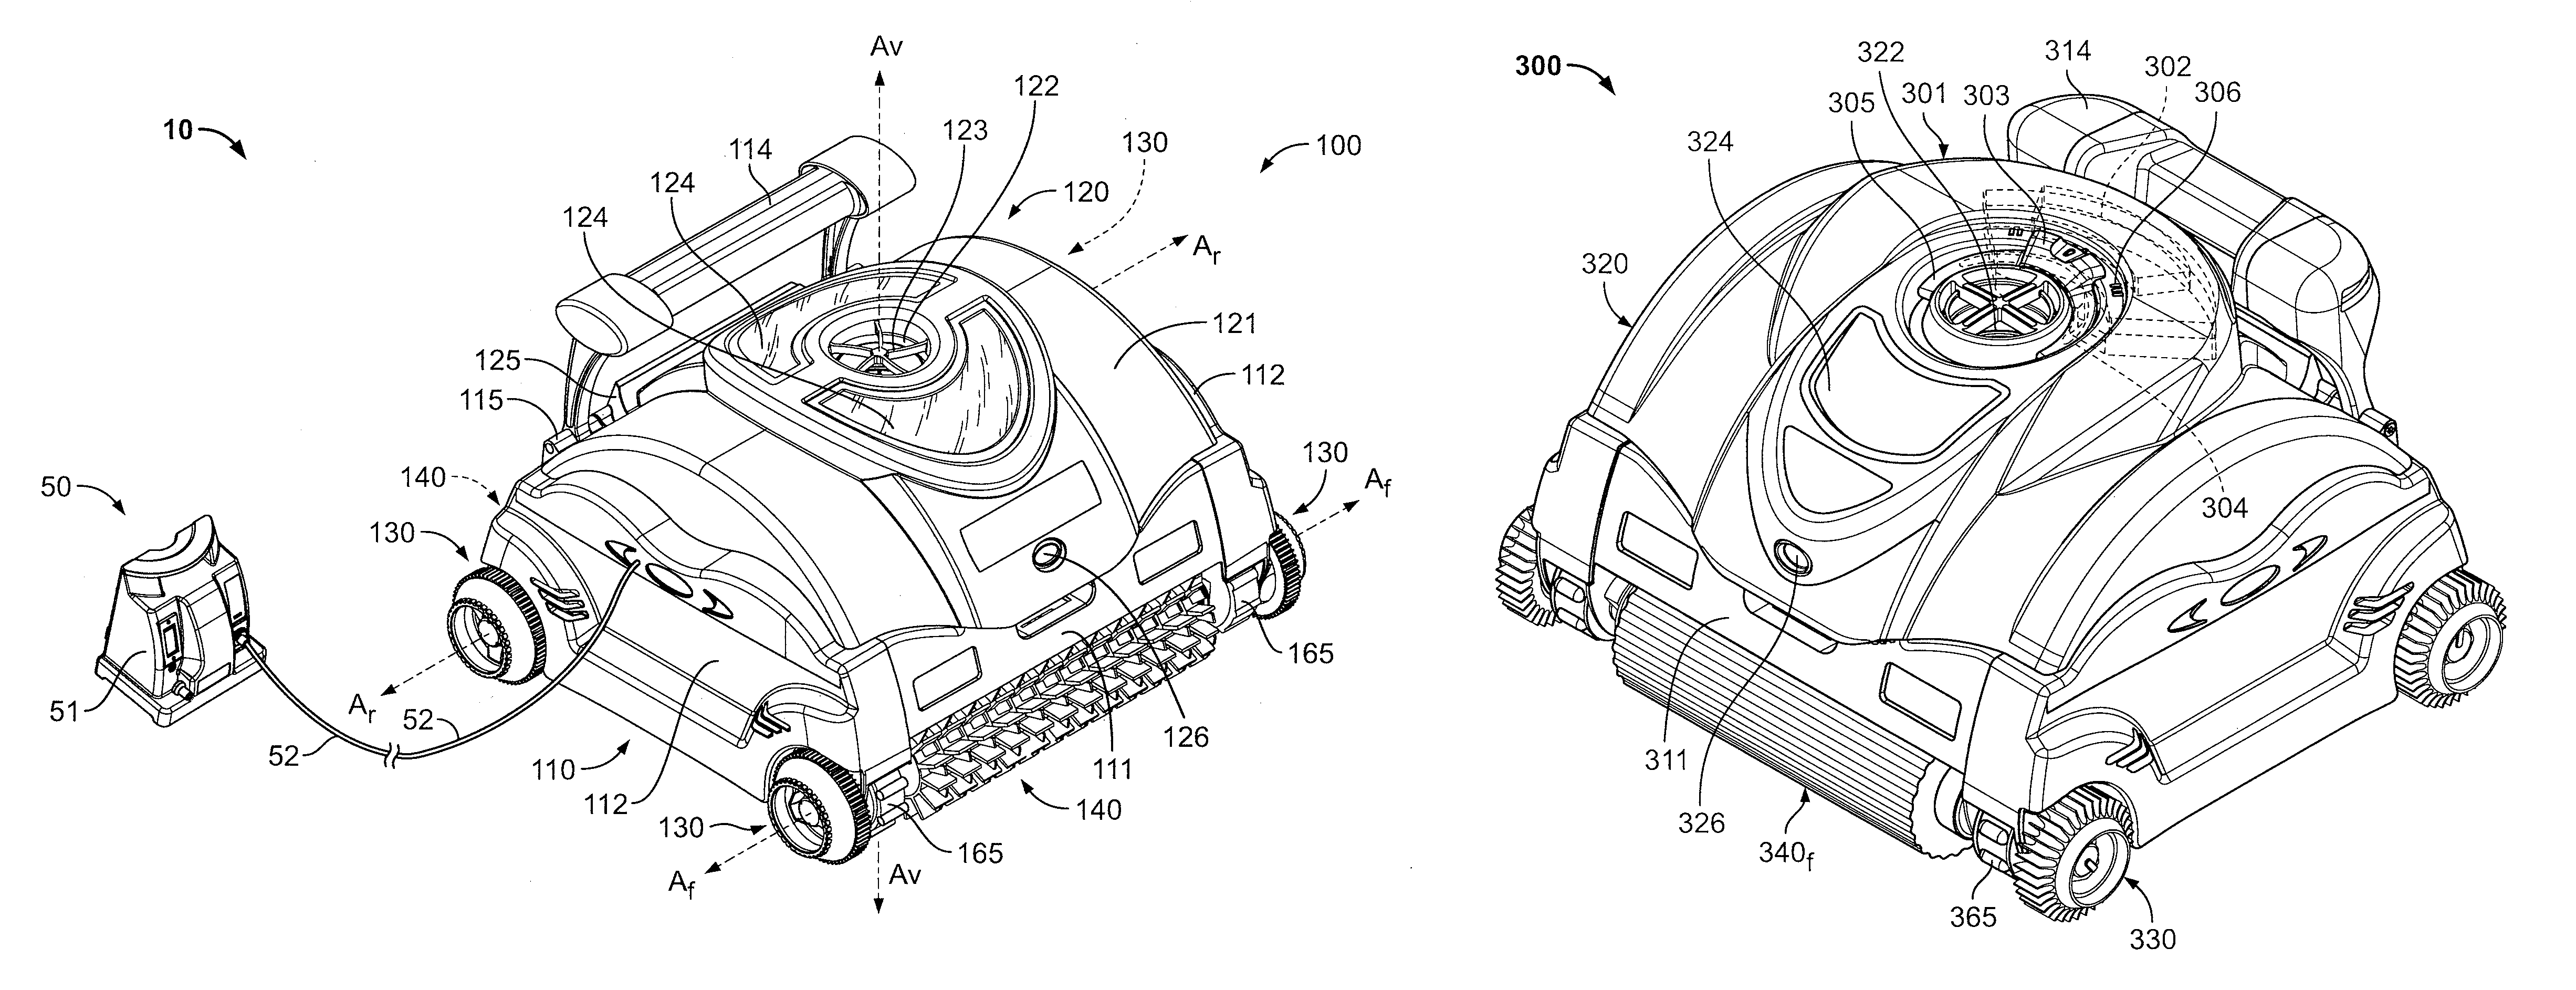 Pool cleaning device with adjustable buoyant element